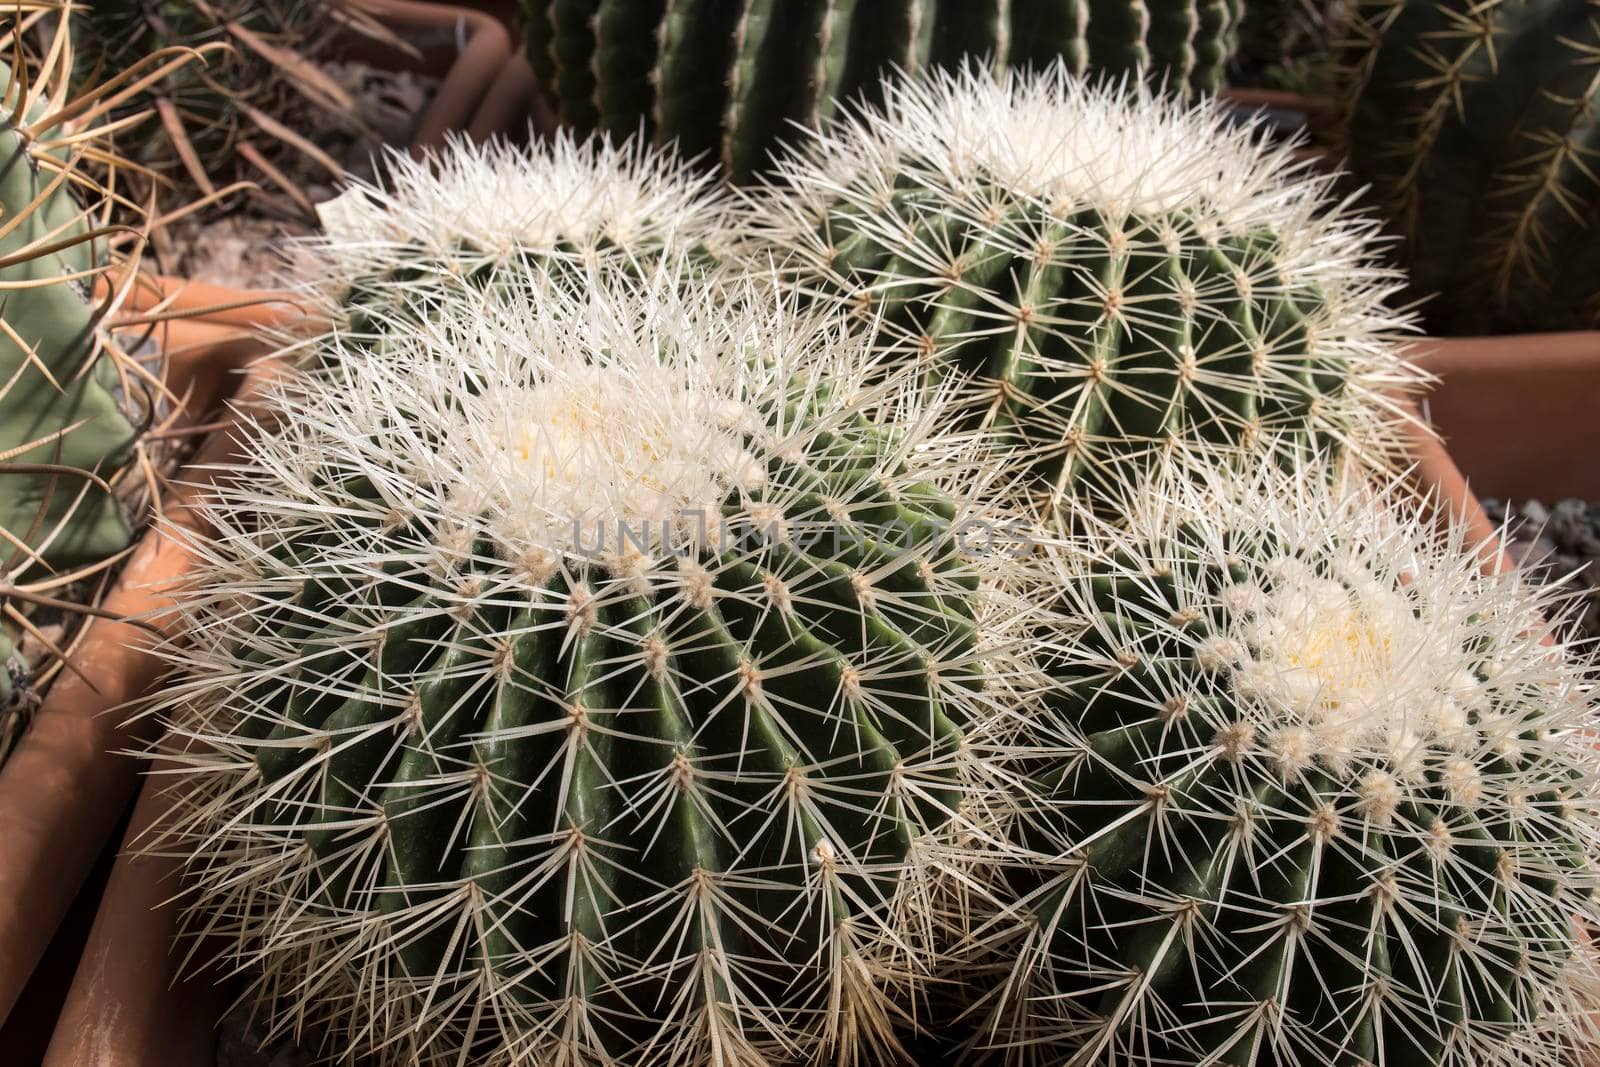 Ferocactus glaucescens, the glaucous barrel cactus, is a species of flowering plant in the family Cactaceae in the botanical garden